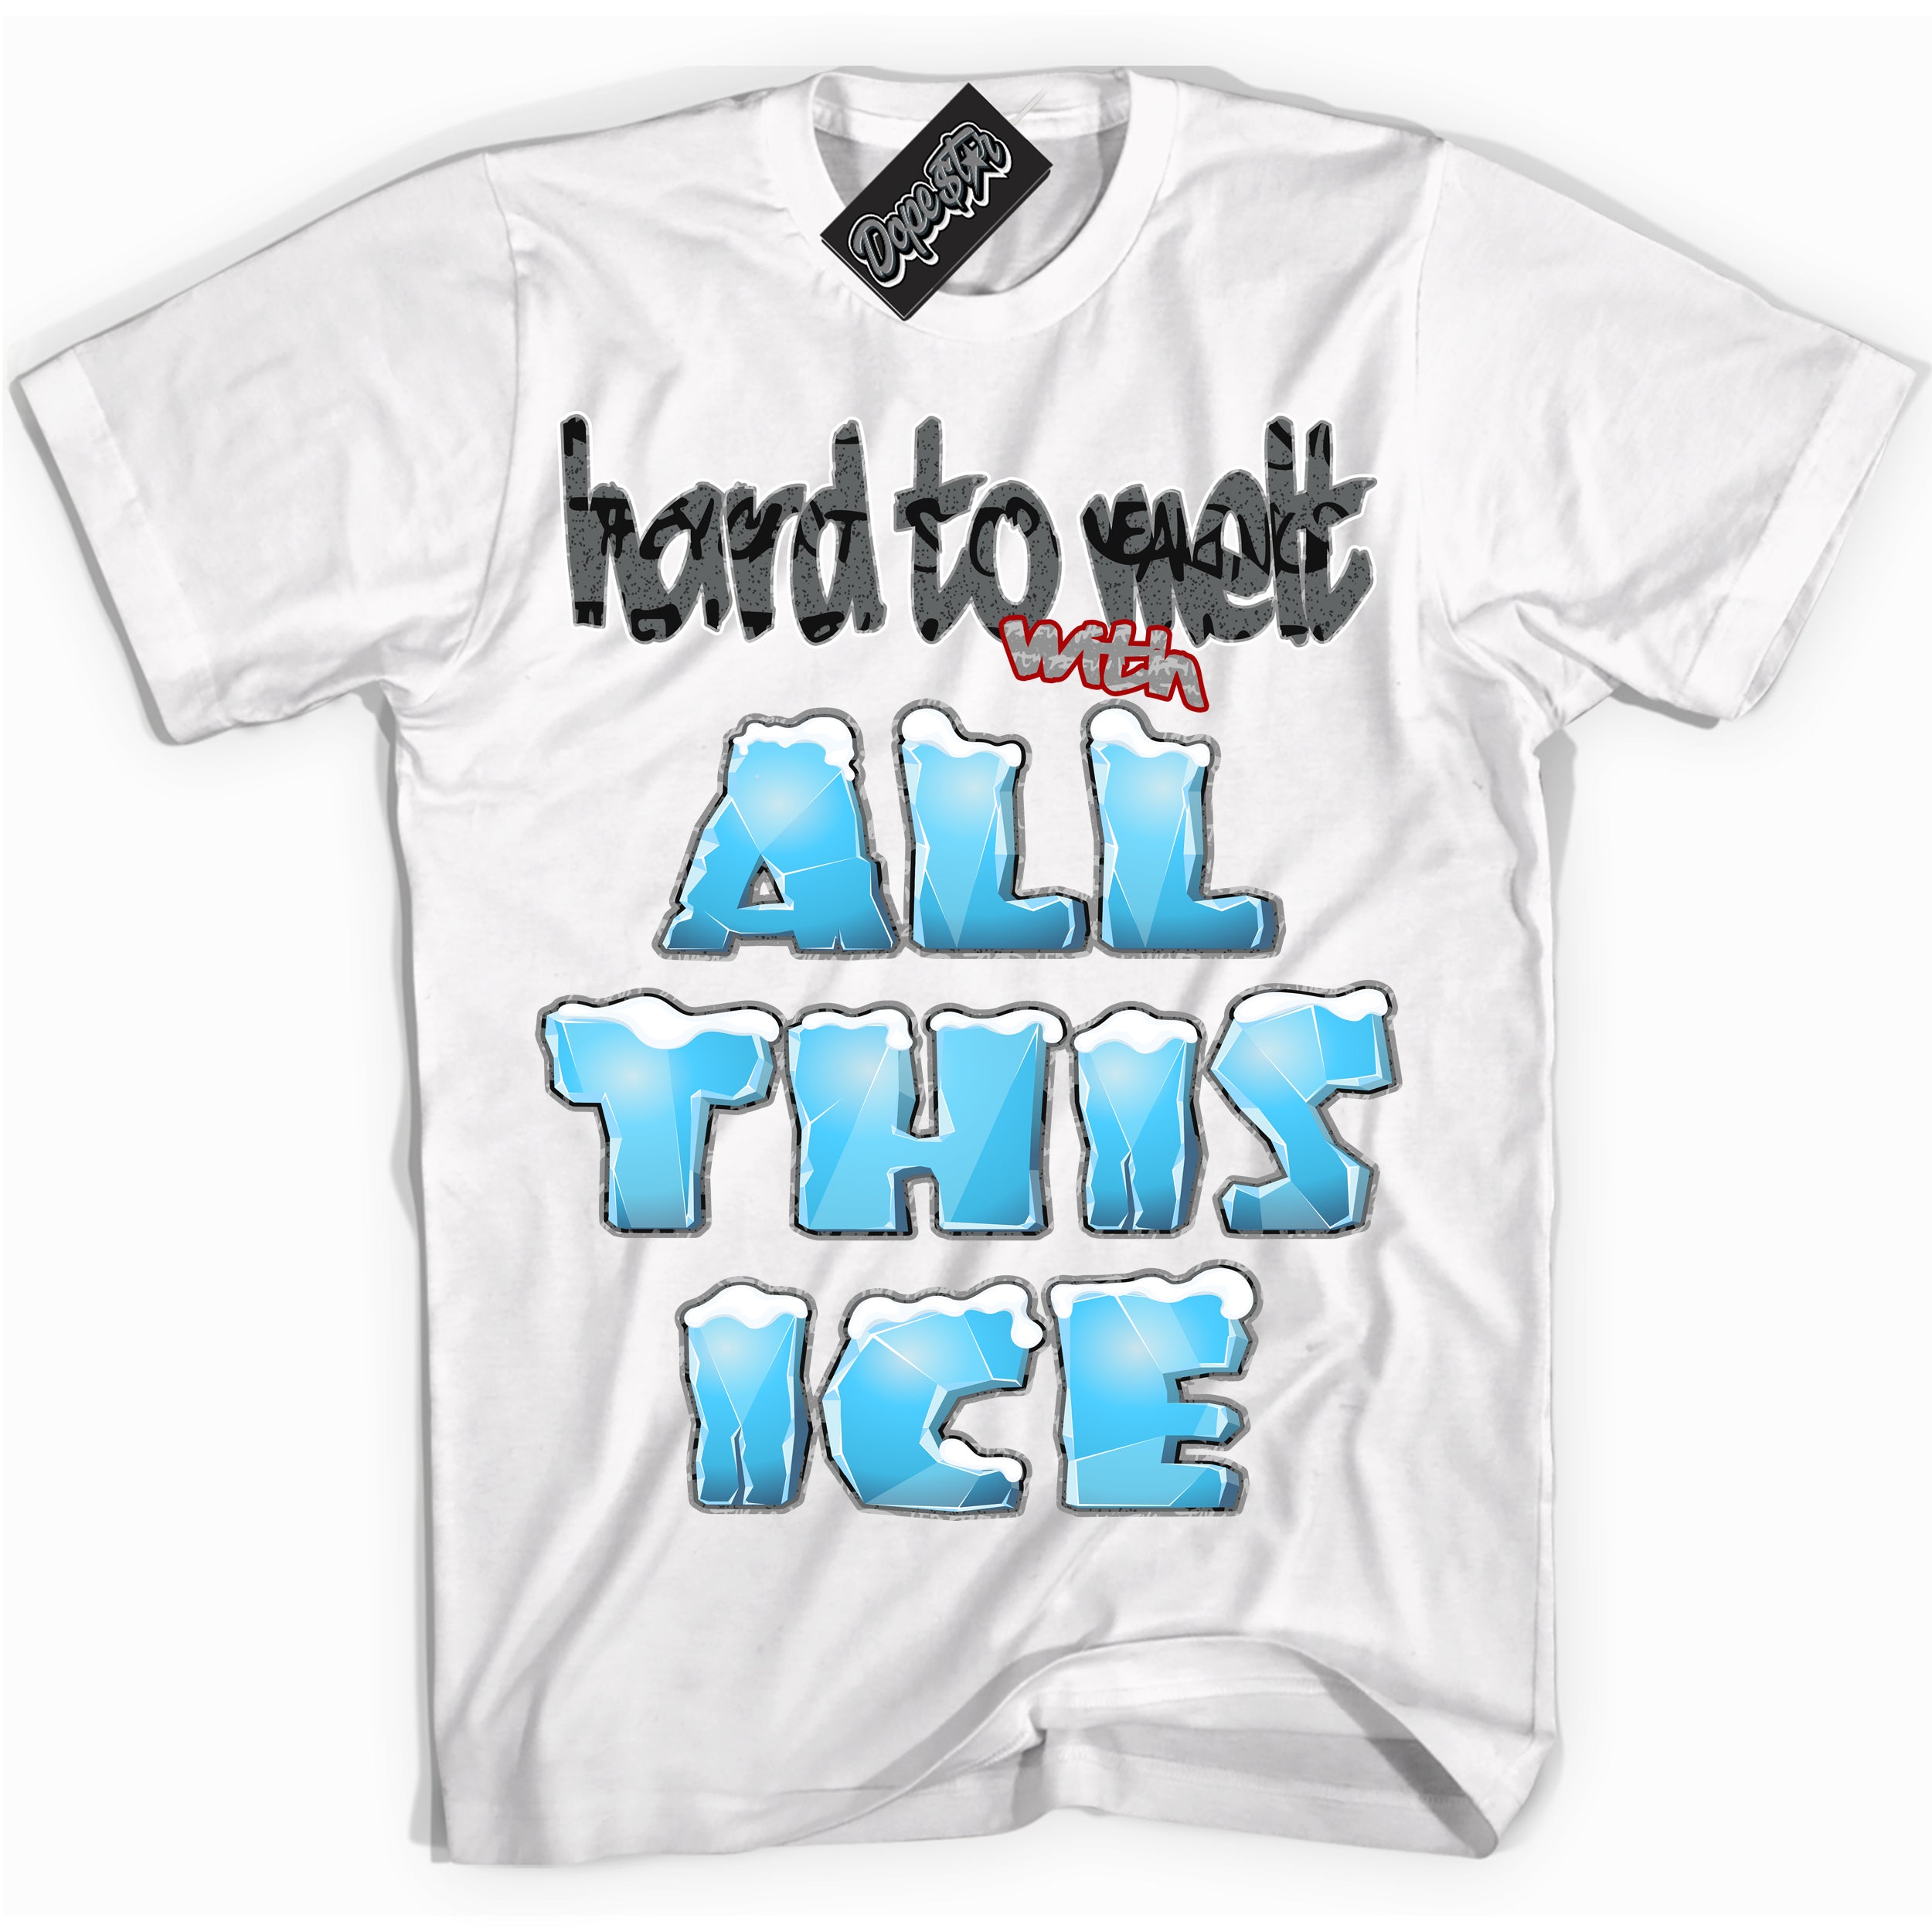 Cool White Shirt with “ All This Ice ” design that perfectly matches Rebellionaire 1s Sneakers.